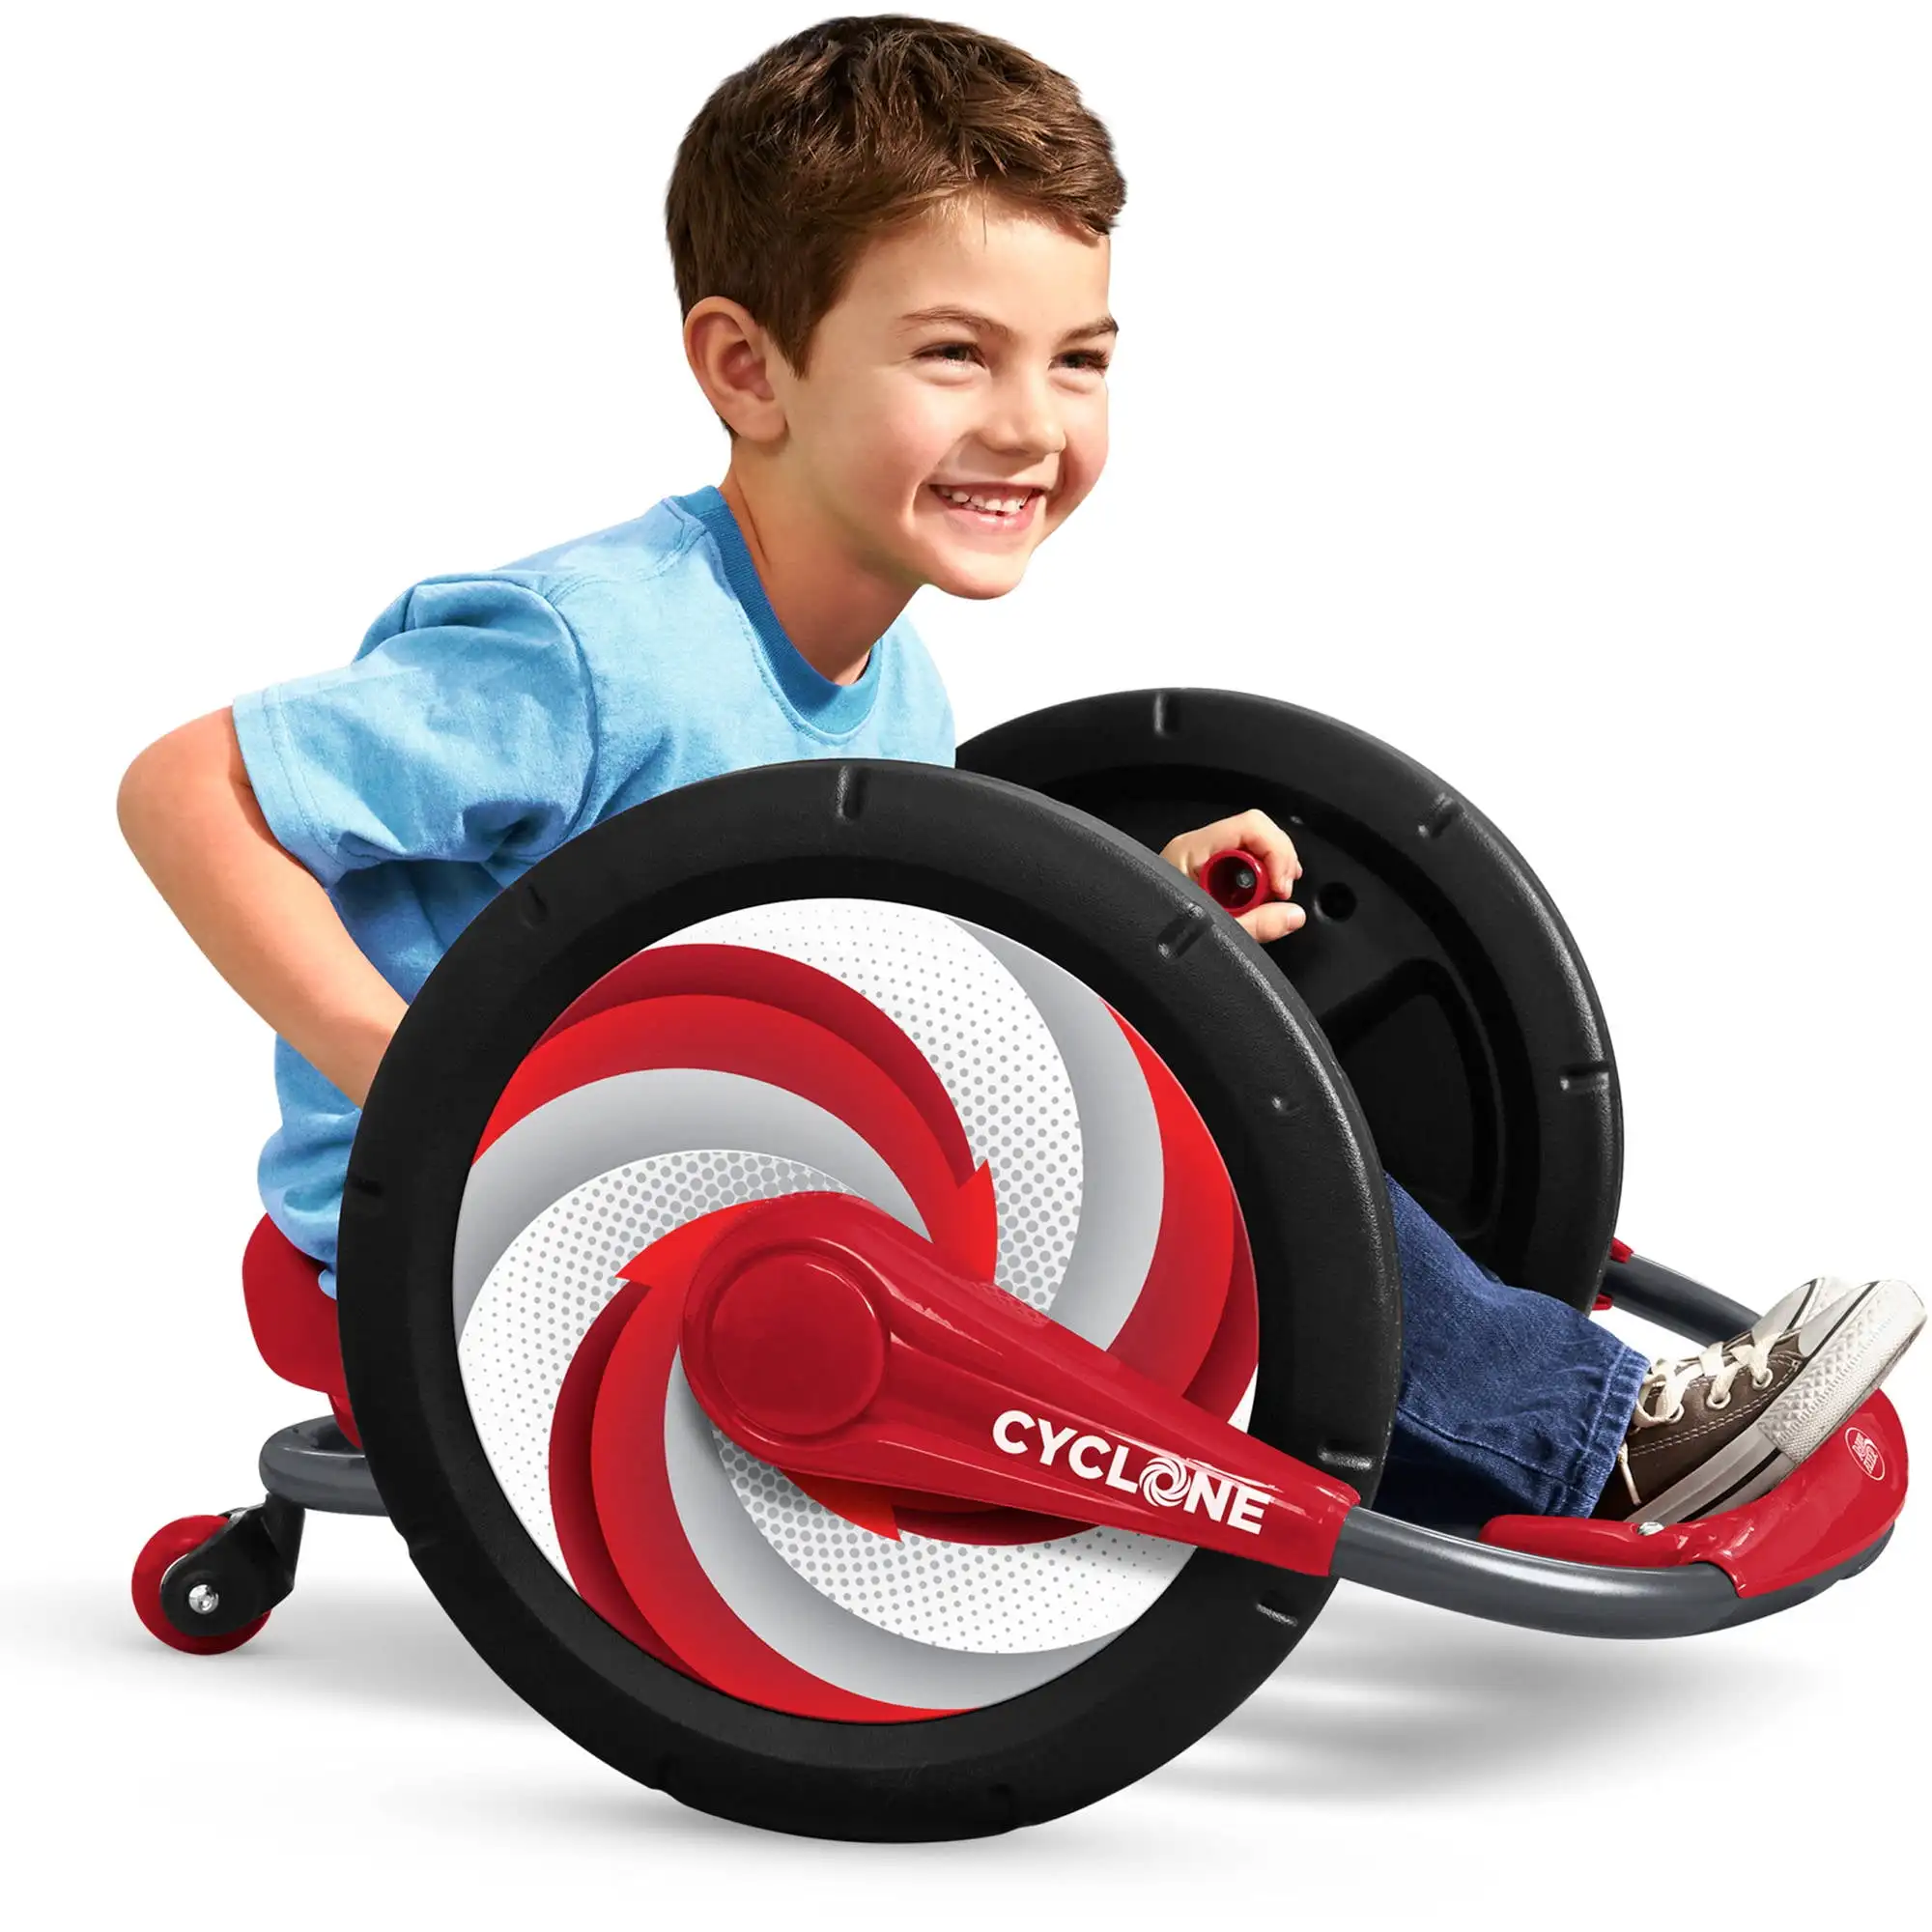 

RD Flyer, Cyclone Ride-on for Kids, Arm Powered, 16" Wheels, Red